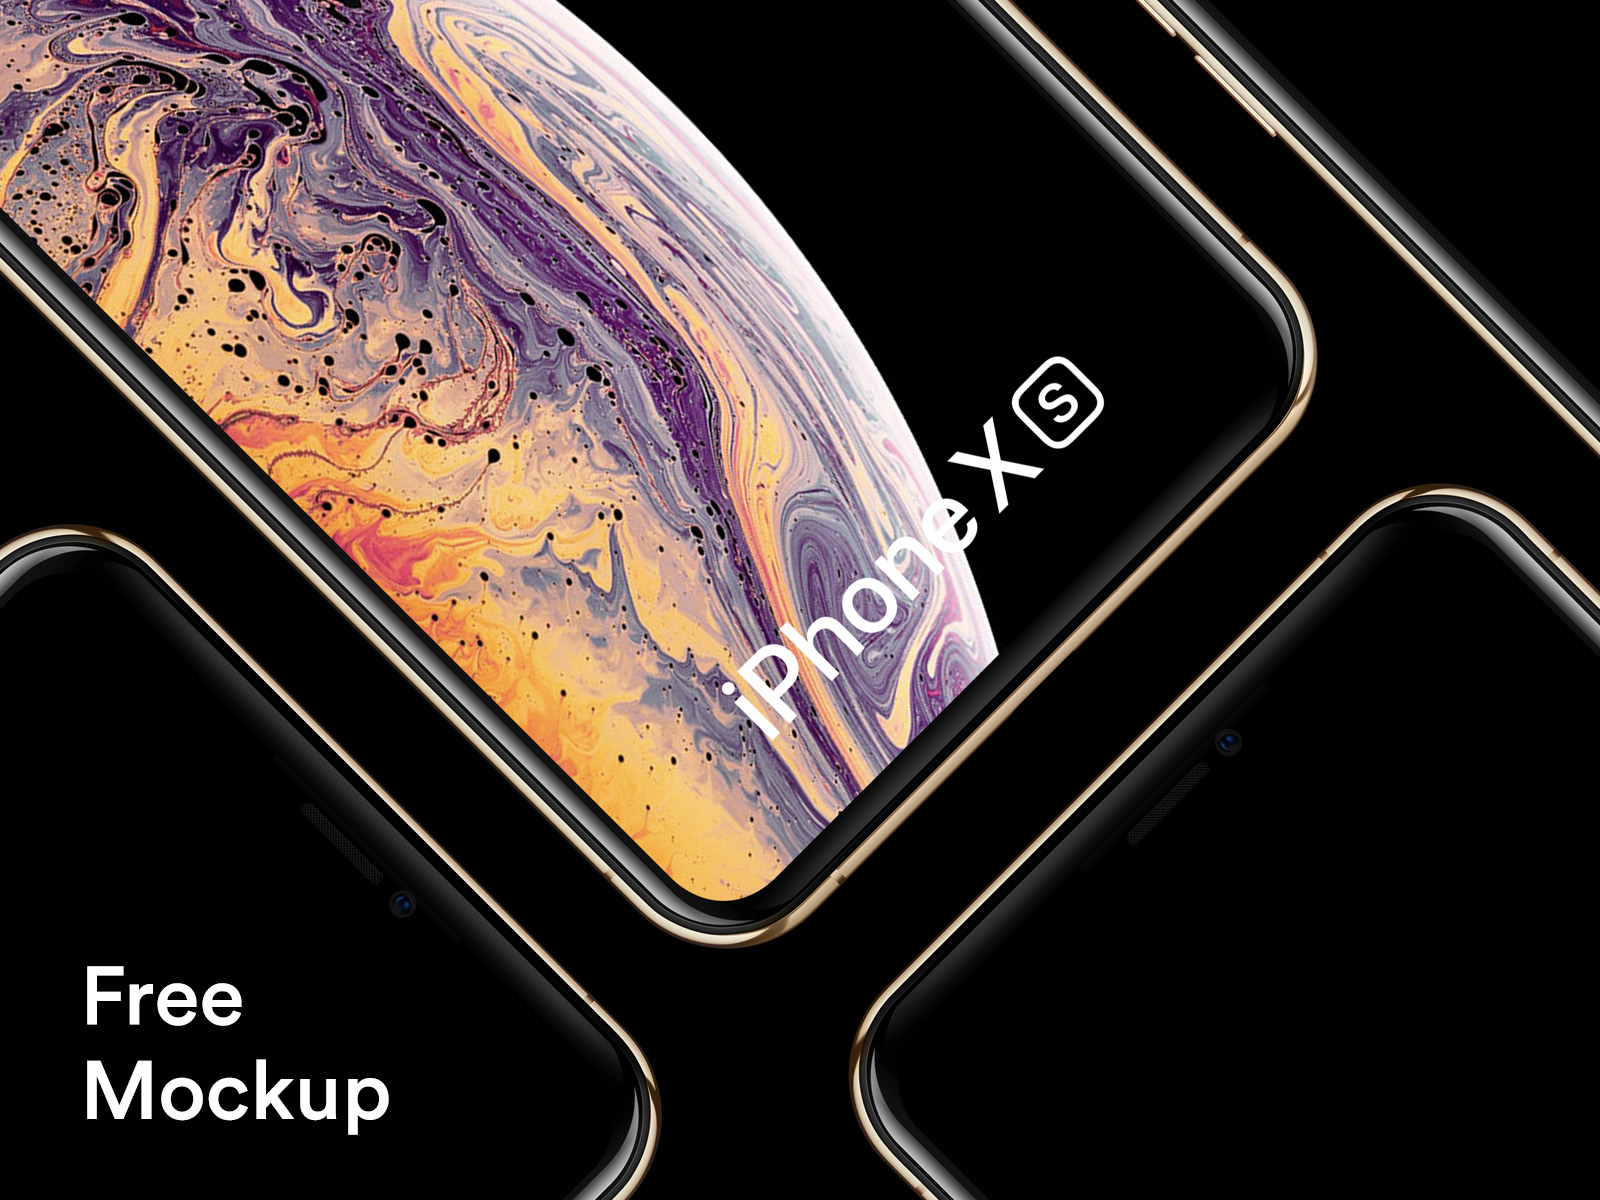 Download Free iPhone Xs and iPhone Xs Max Mockups by Ruslanlatypov for ls.graphics on Dribbble